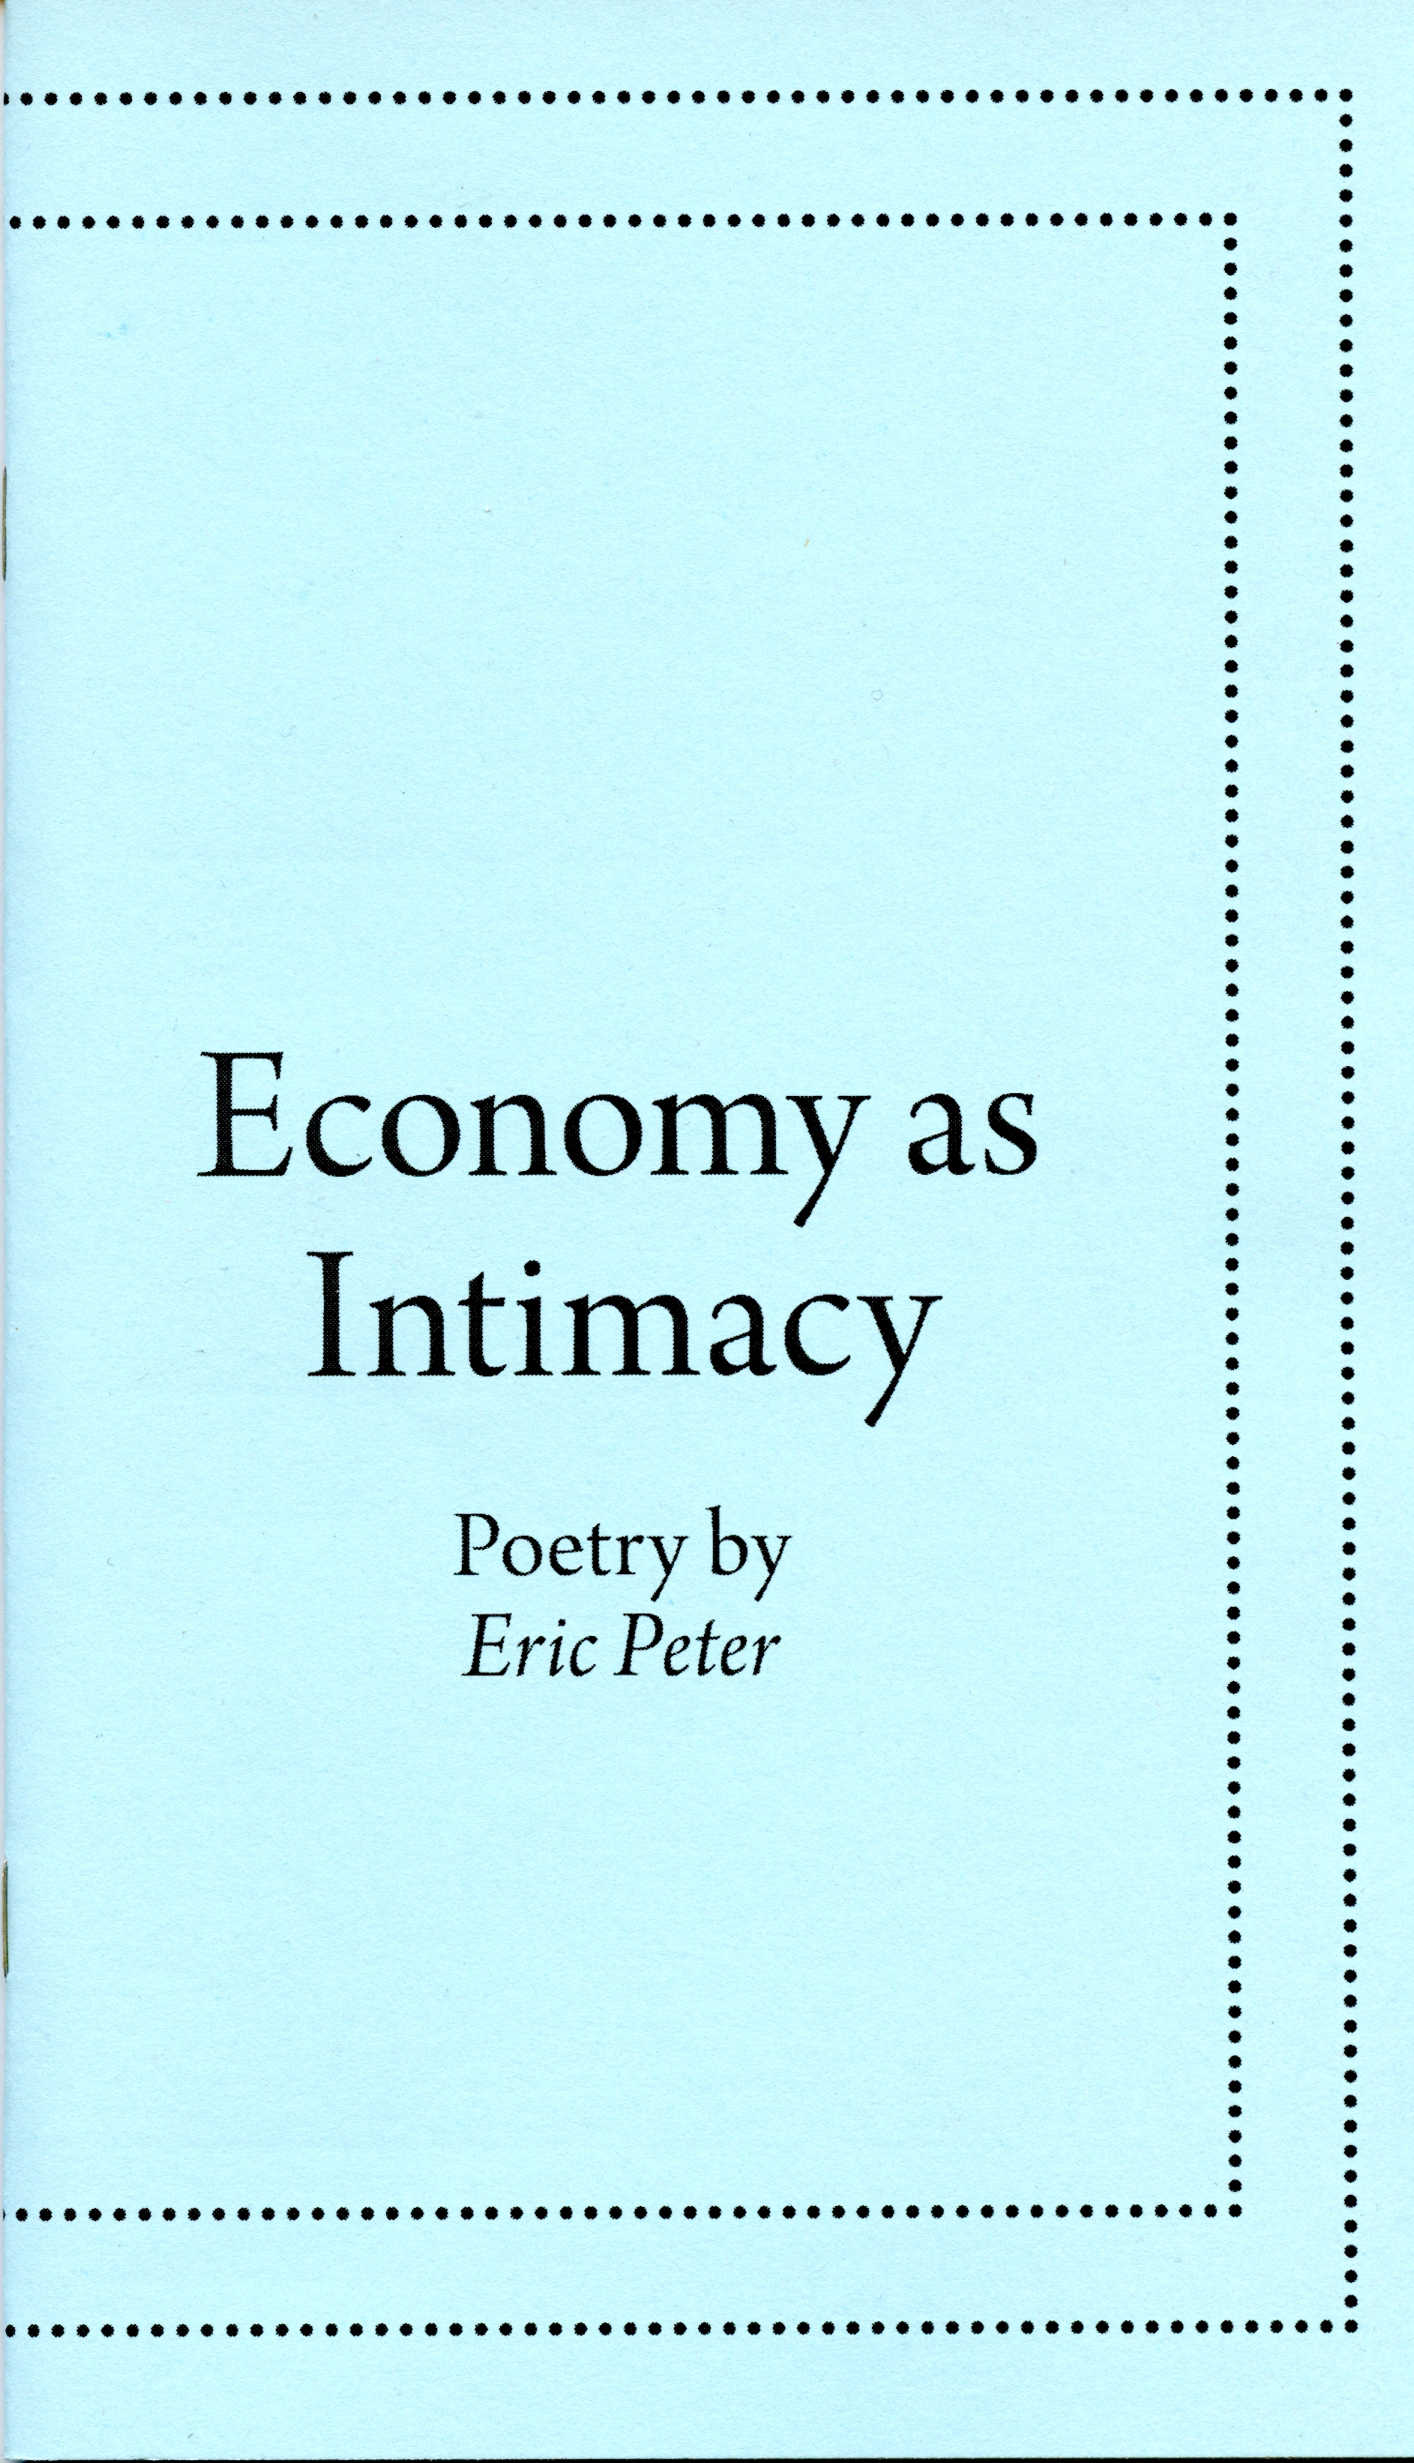 Economy as Intimacy - book cover by Eric Peter. 